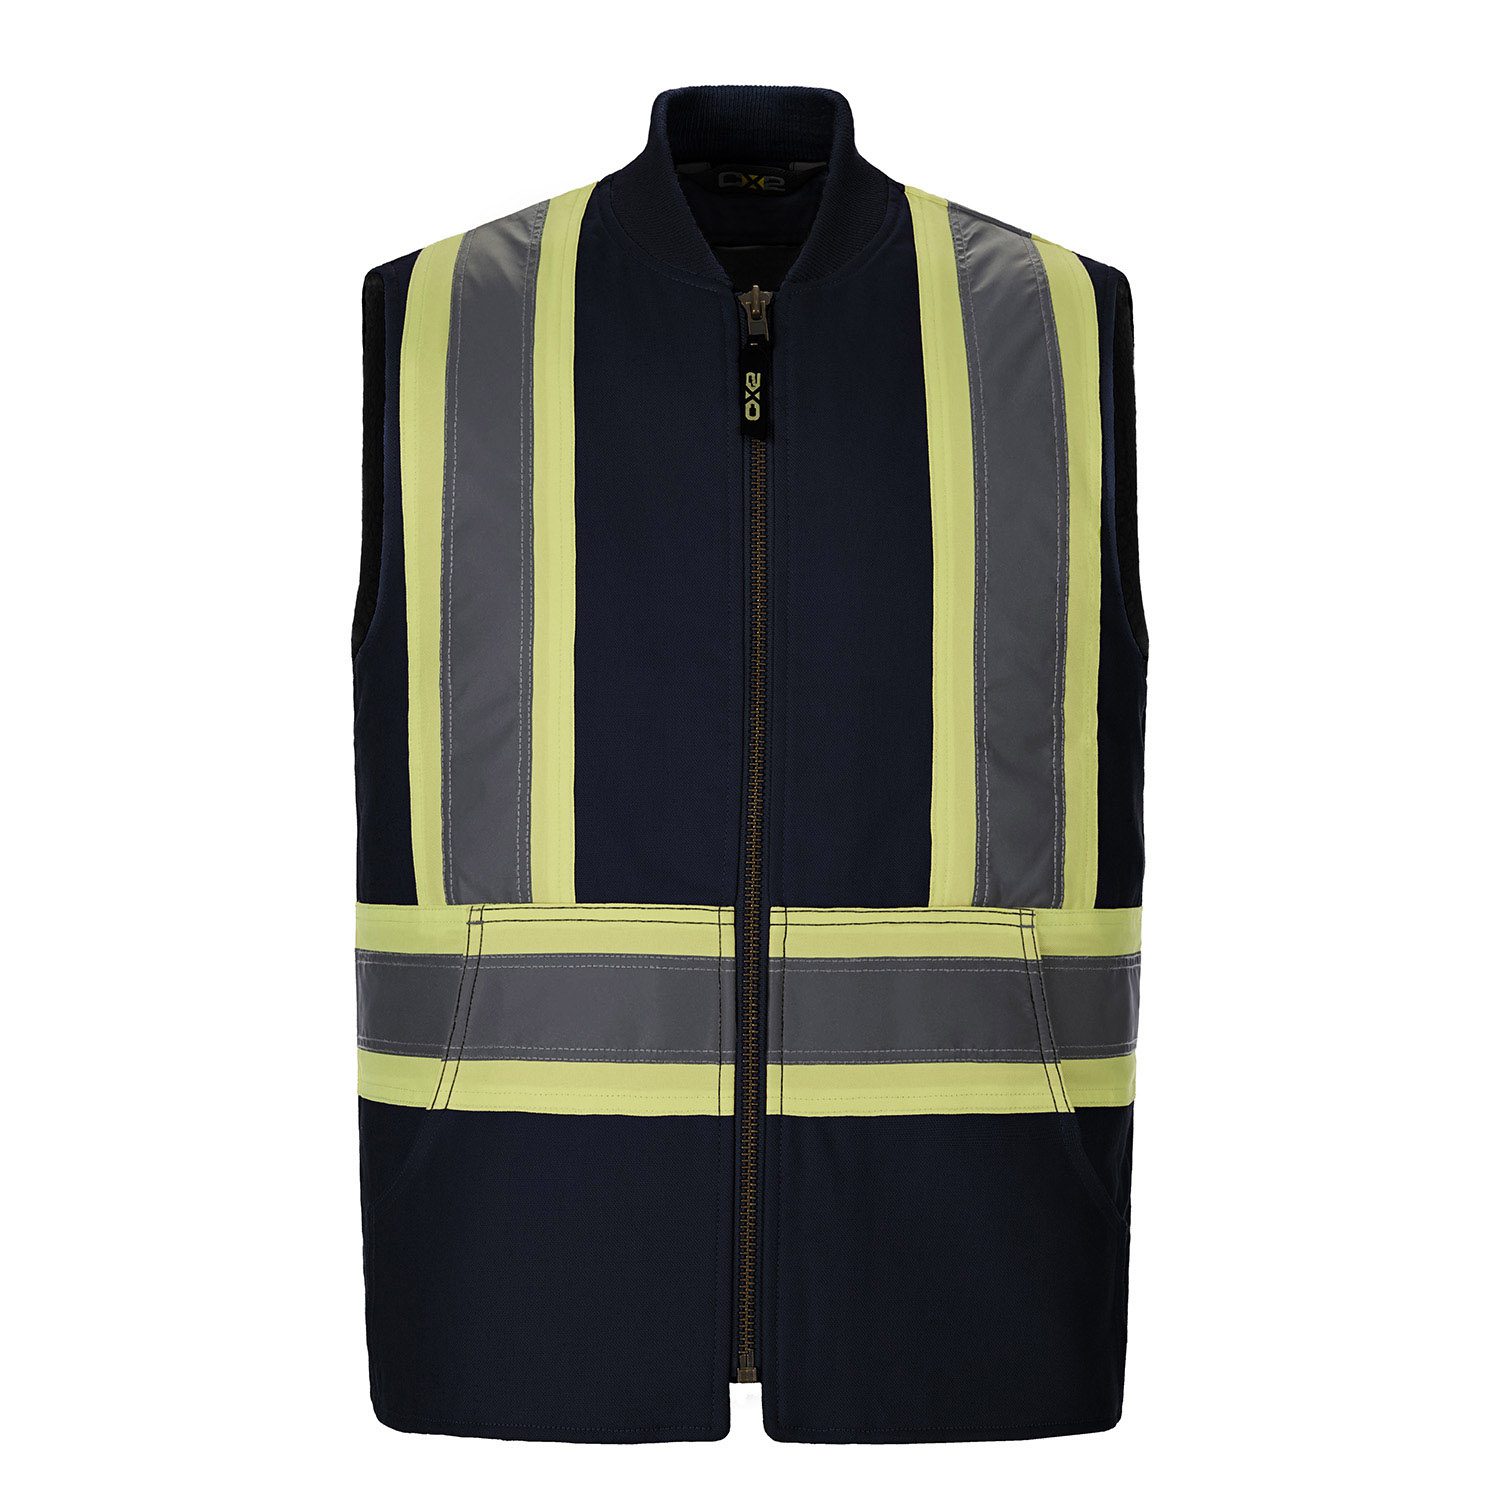 Canada Sportswear HiVis Vest with Sherpa Lining #L01295 Navy